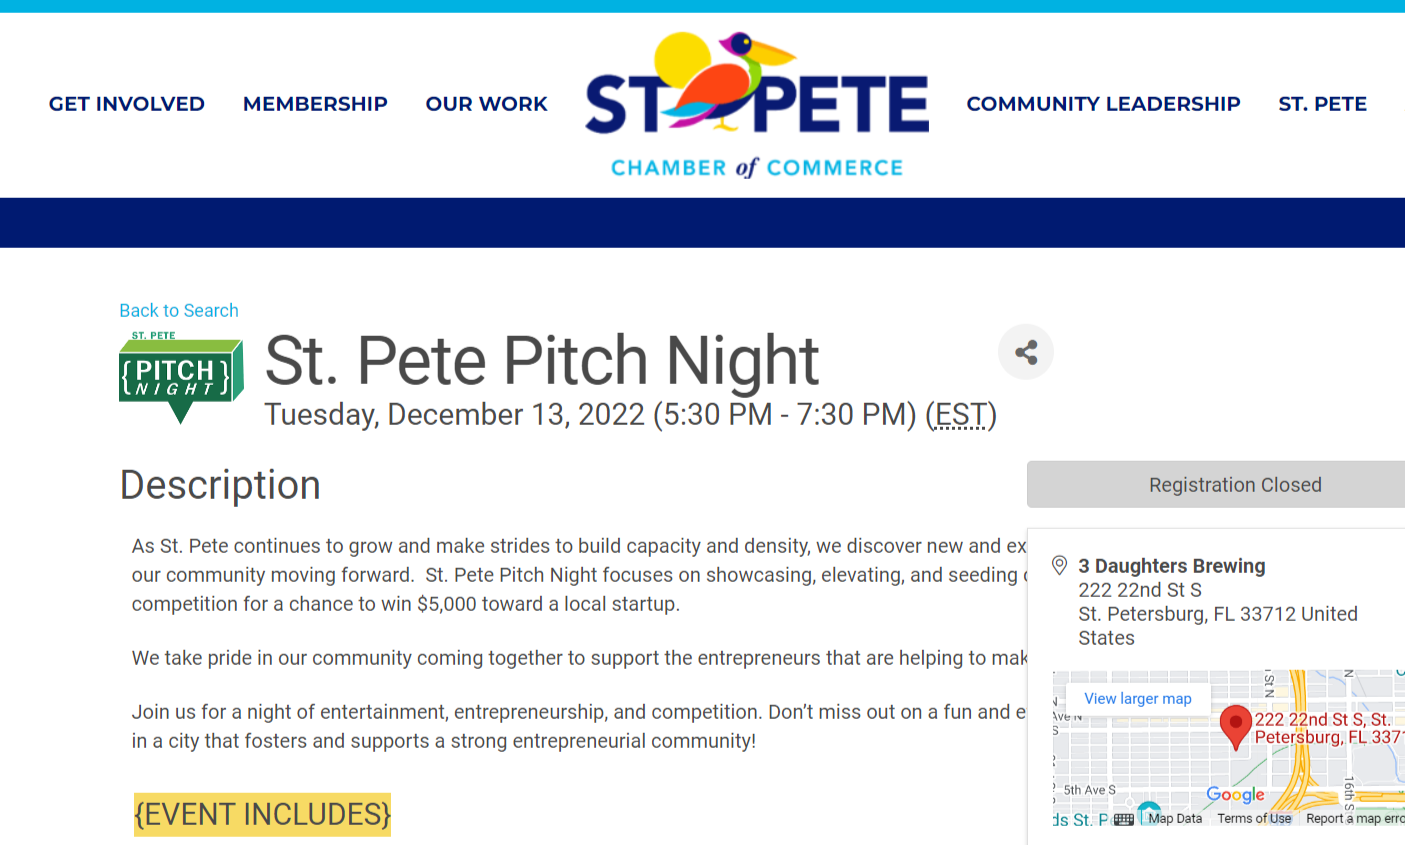 St Pete Chamber of Commerce Pitch Night event.